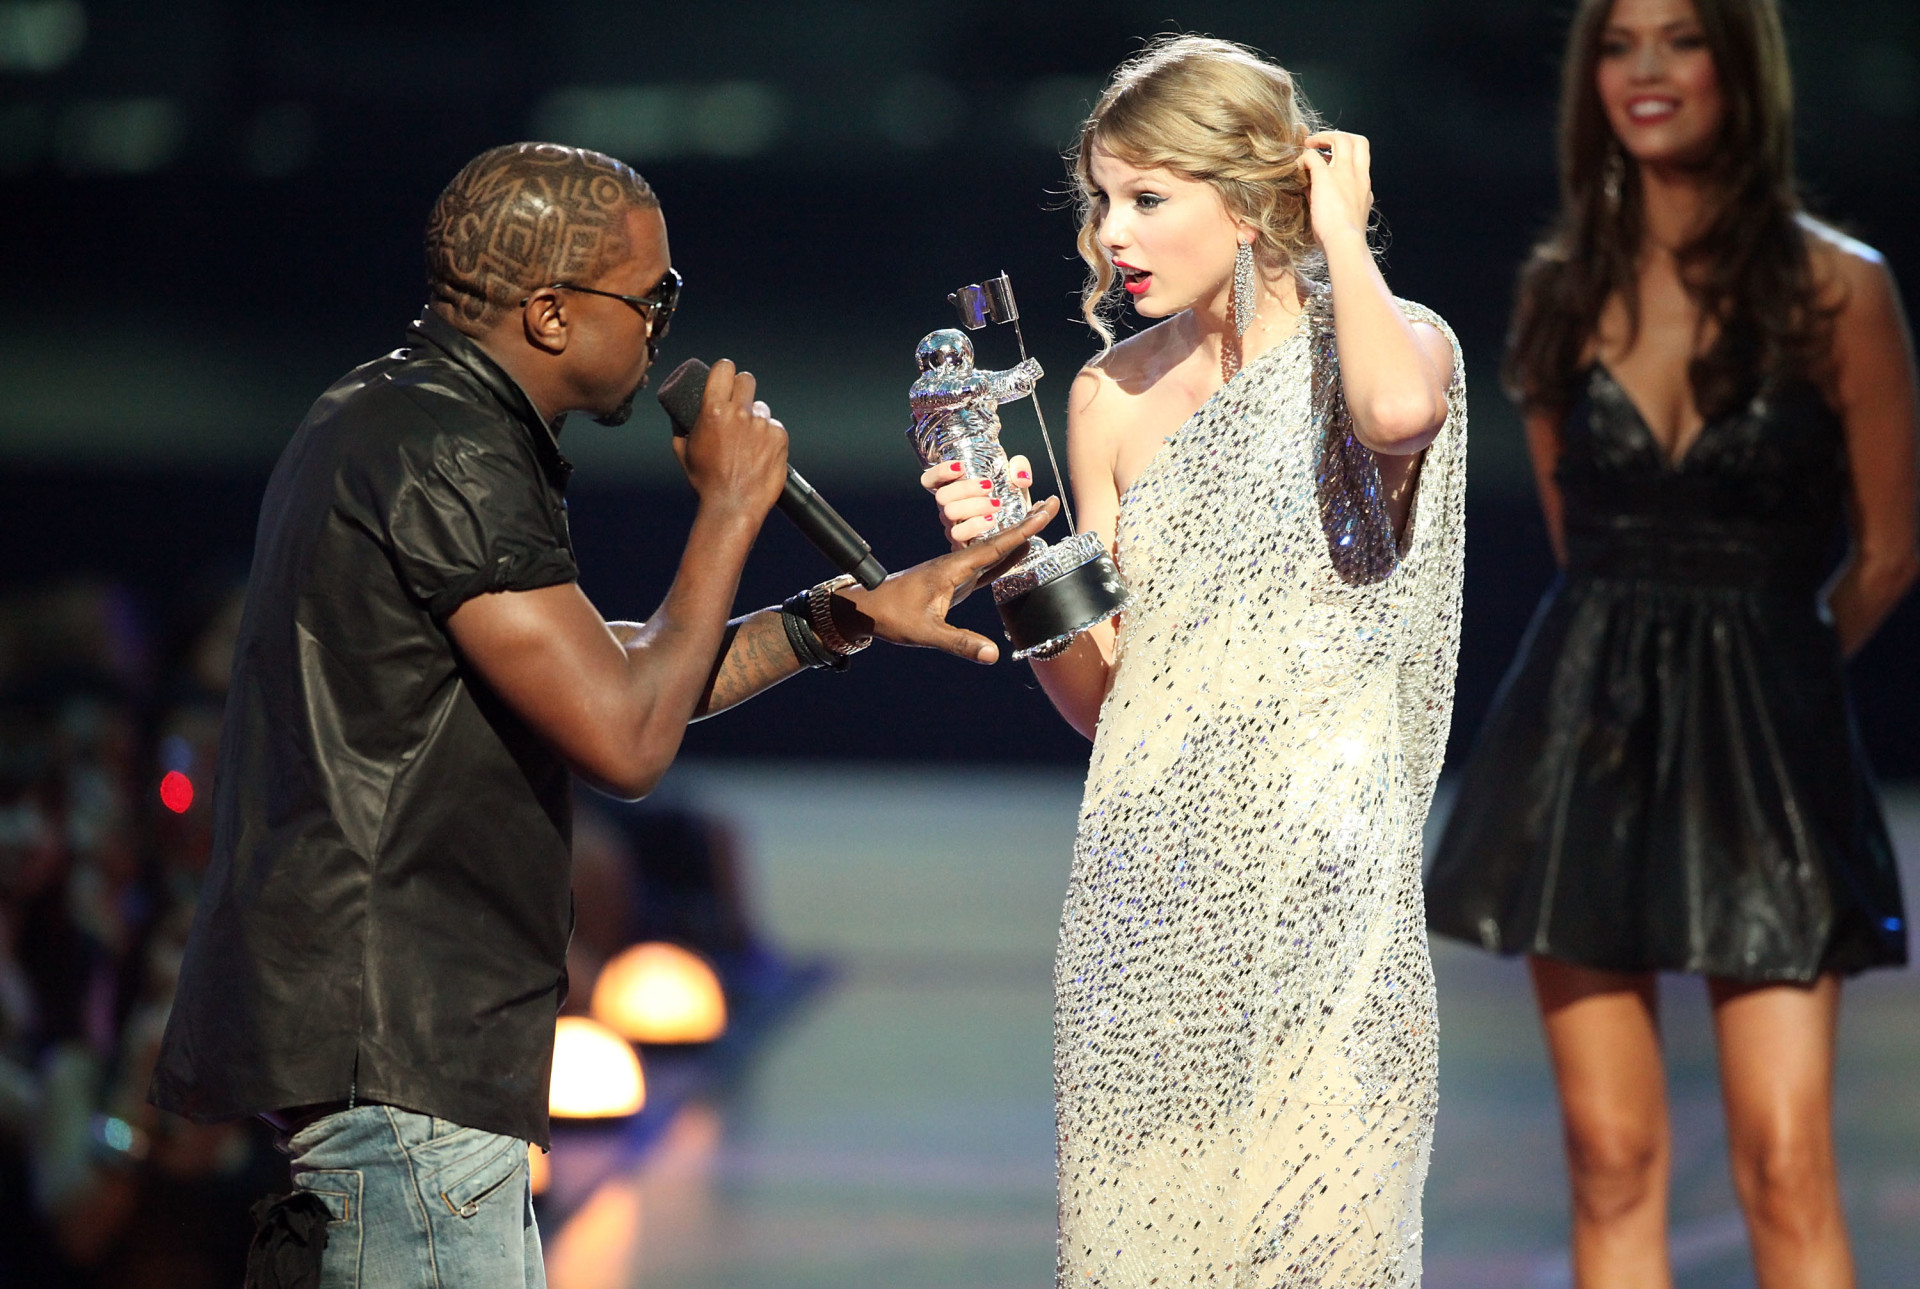 <p>In 2009, during the VMAs, Swift received the Best Female Video Award. However, Kanye interrupted her speech, grabbing the microphone to proclaim that Beyoncé should have been the rightful winner.</p>